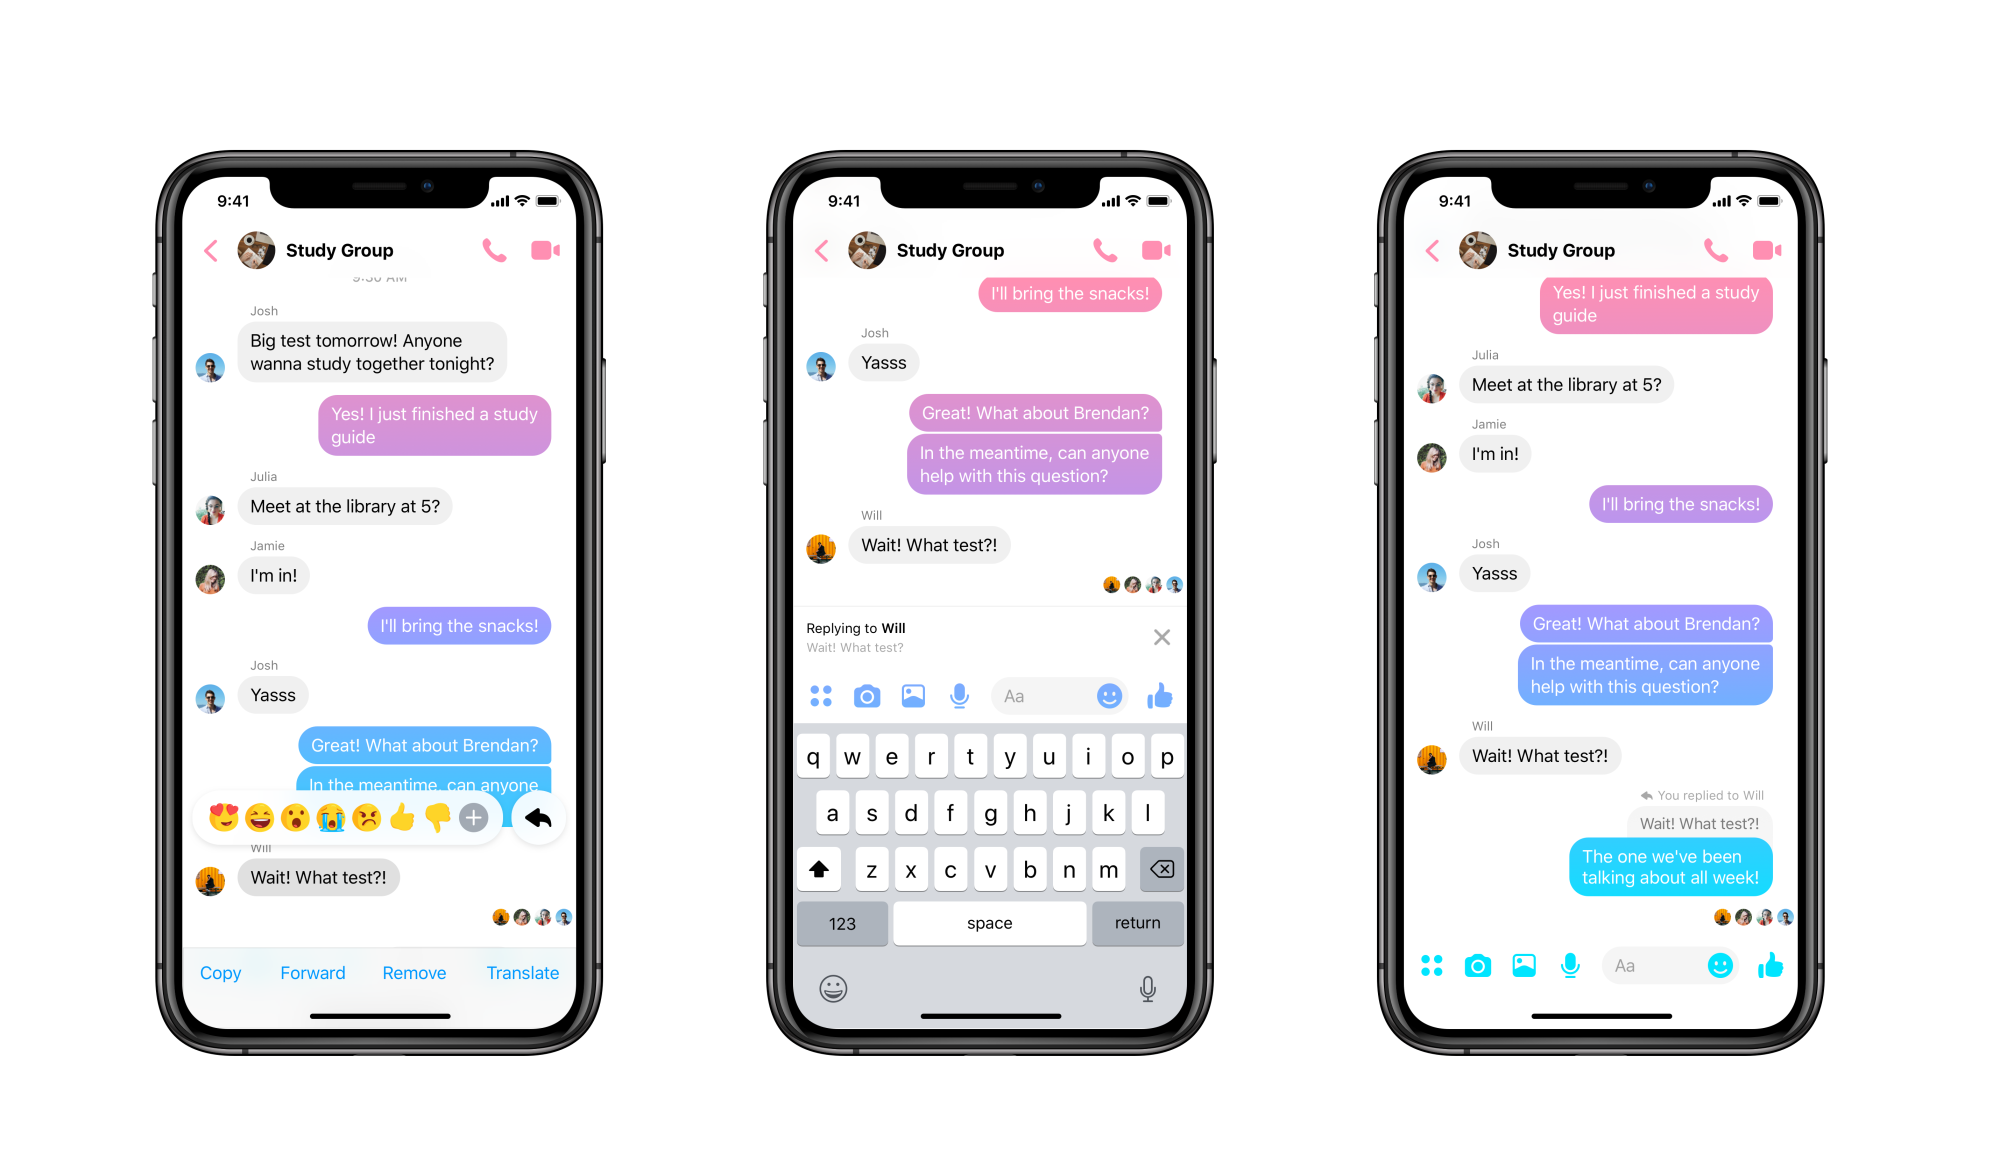 Facebook Messenger adds new threaded replies feature for conversations - 9to5Mac